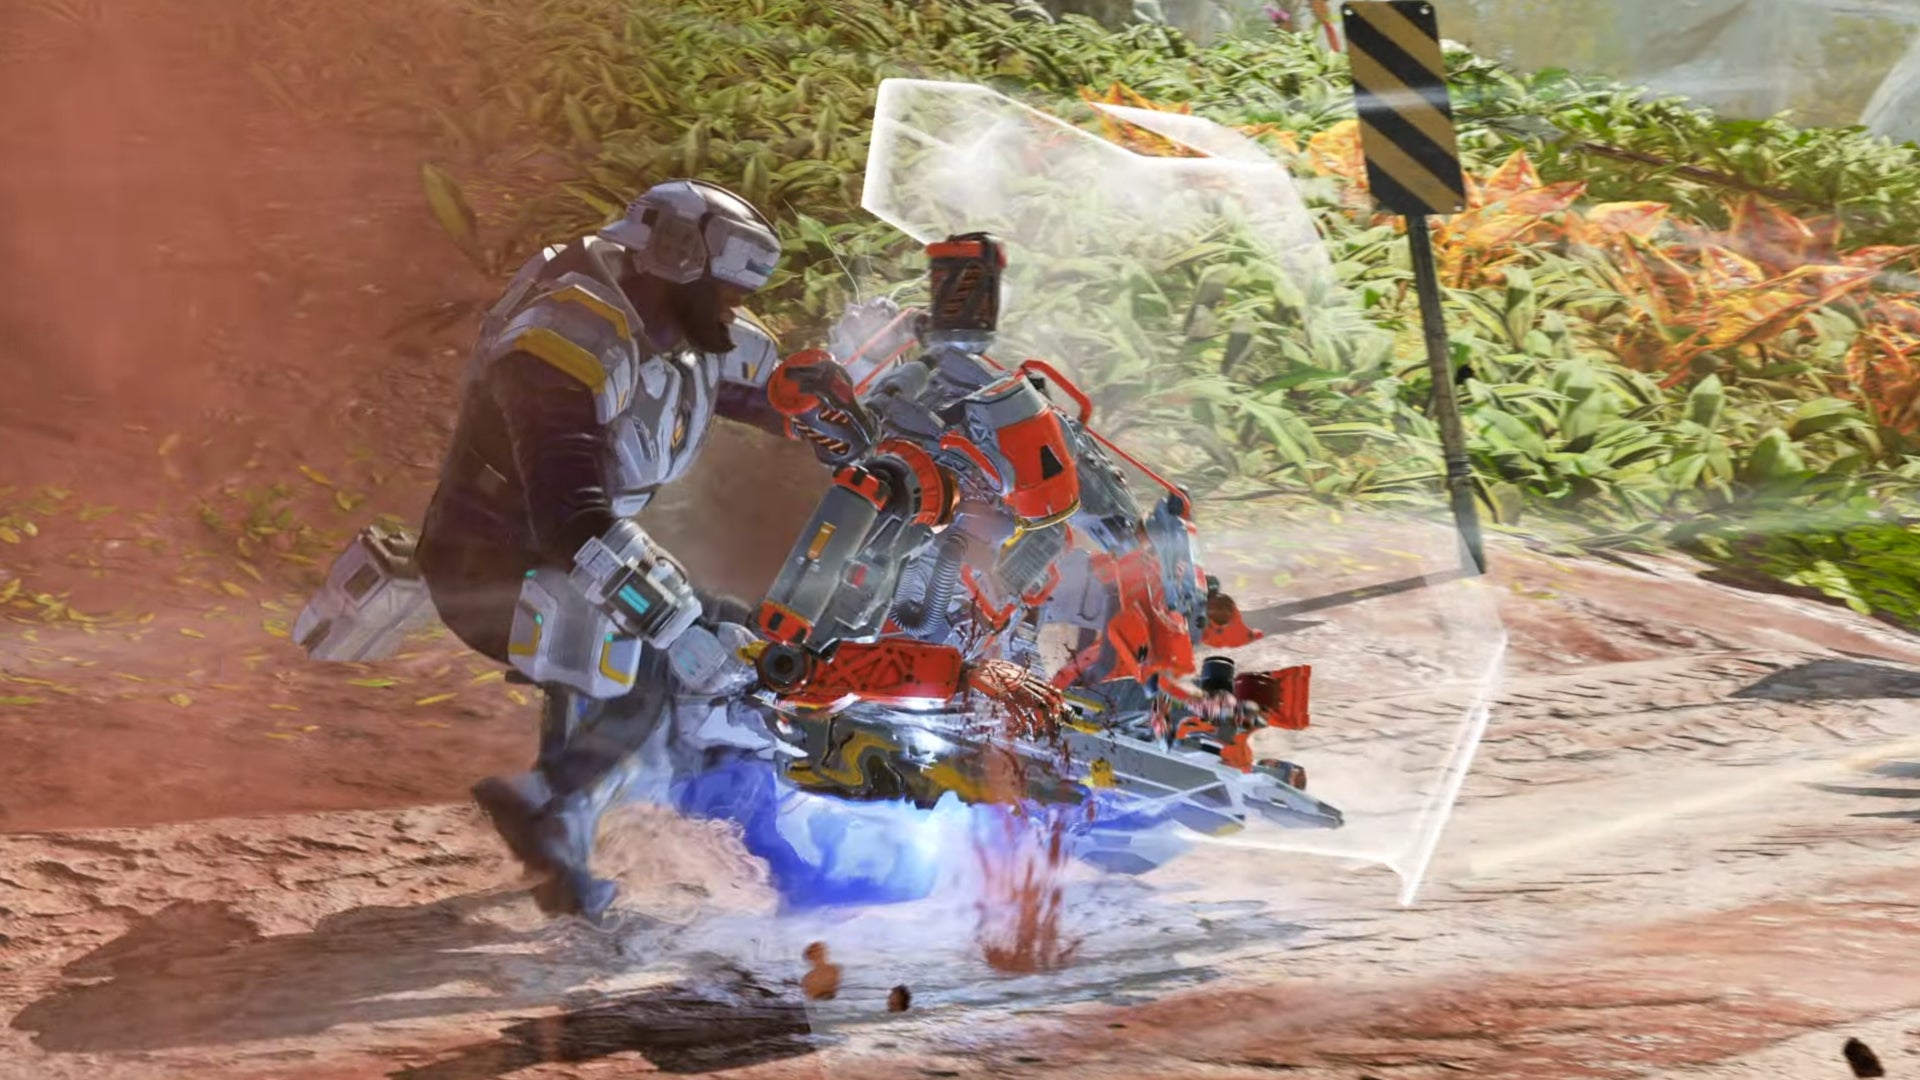 Newcastle in Apex Legends uses his Treat The Wounded Passive to protect a downed teammate while reviving them.